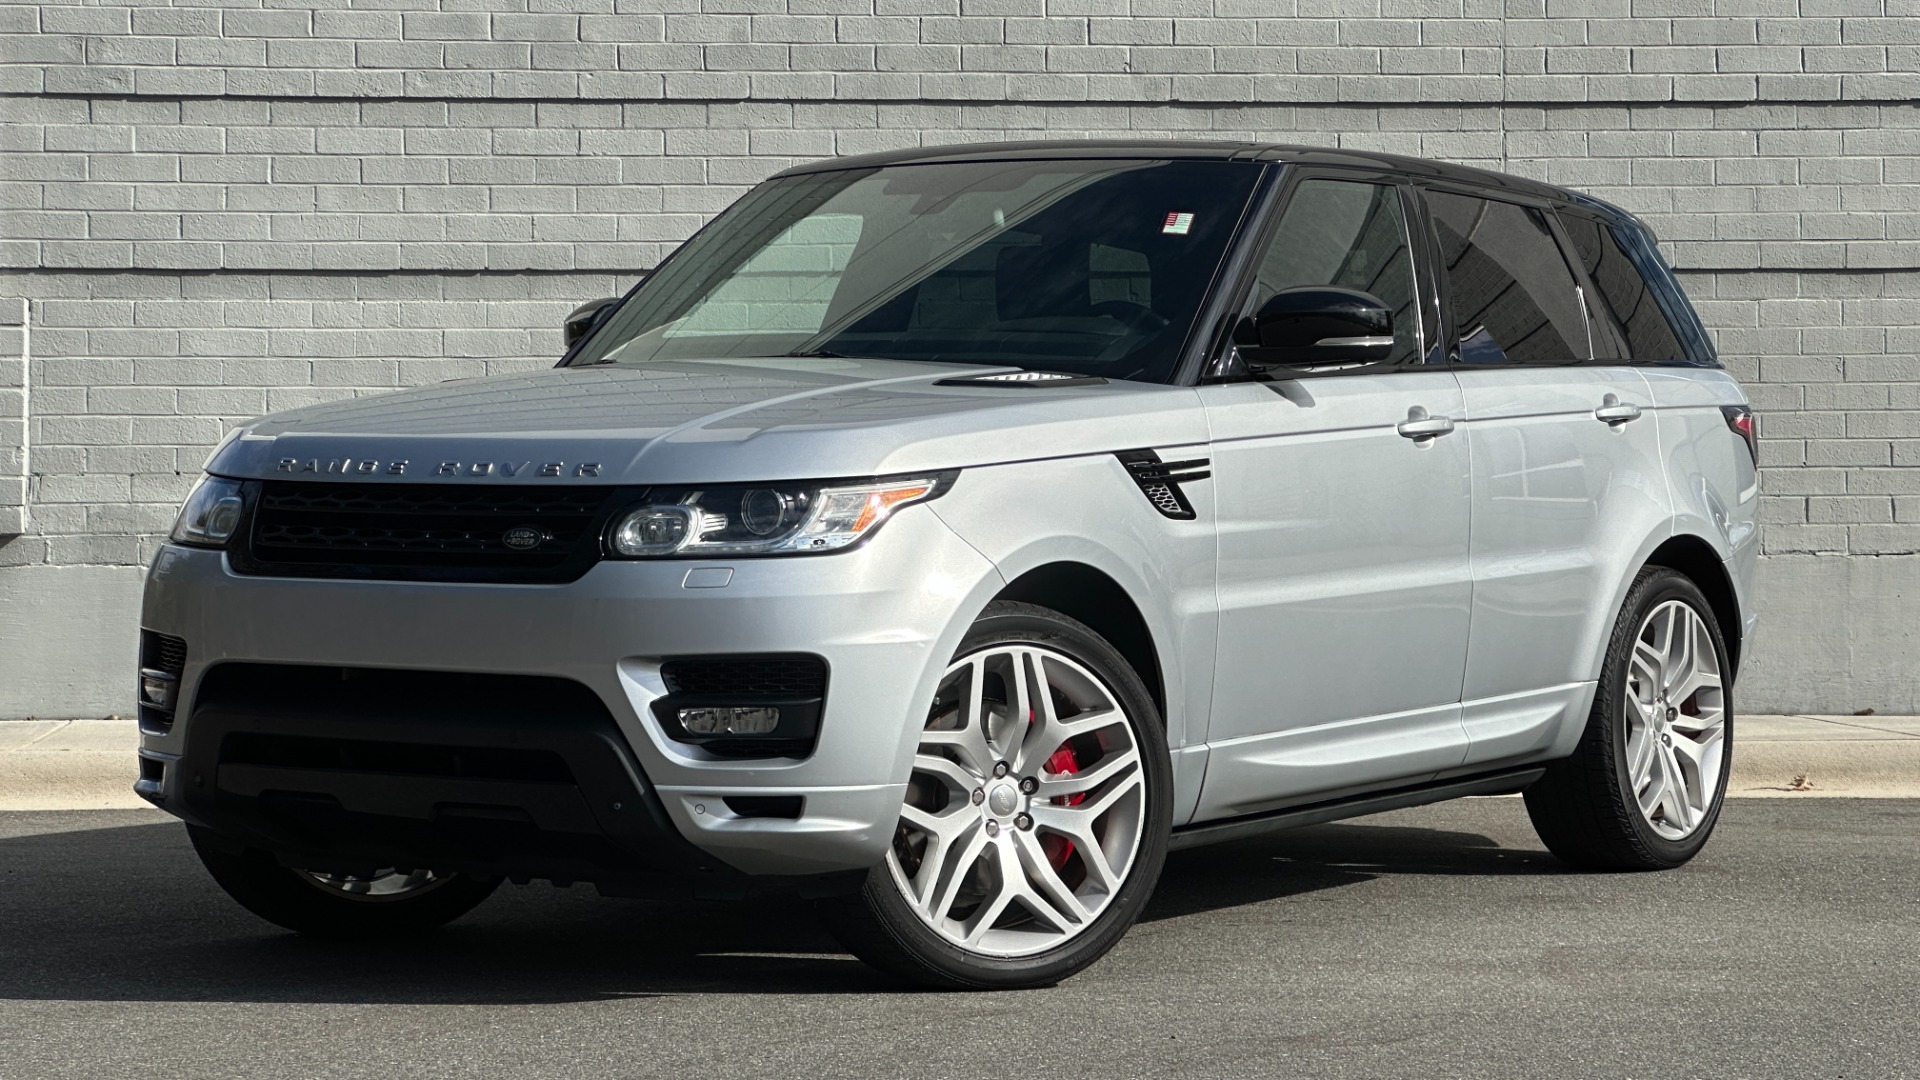 Used 2014 Land Rover Range Rover Sport Autobiography for sale $36,999 at Formula Imports in Charlotte NC 28227 1